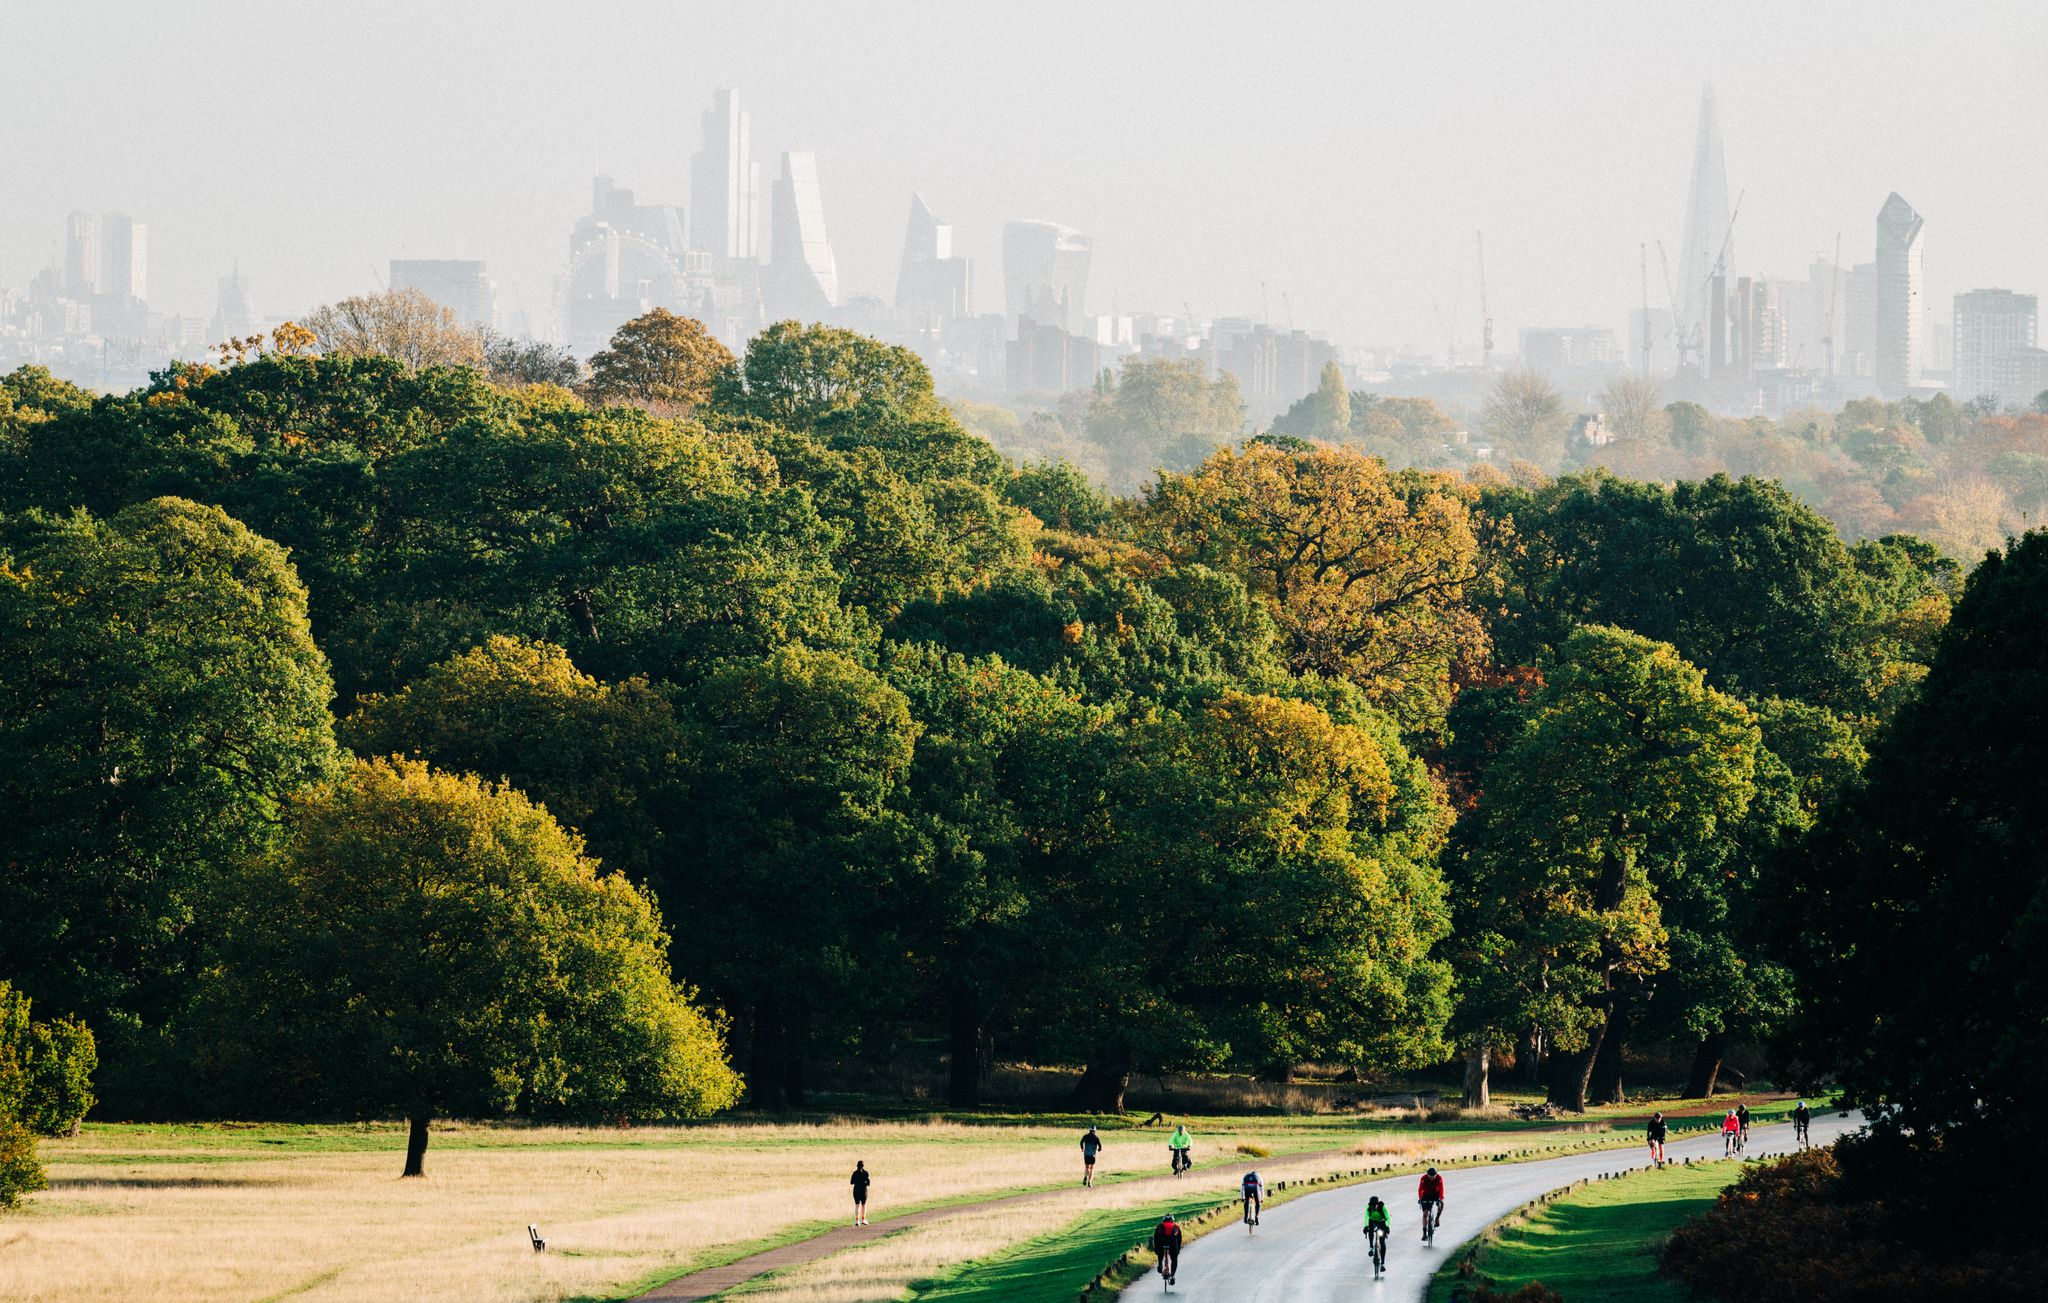 A view of London Park during daytime. | Source: Getty Images